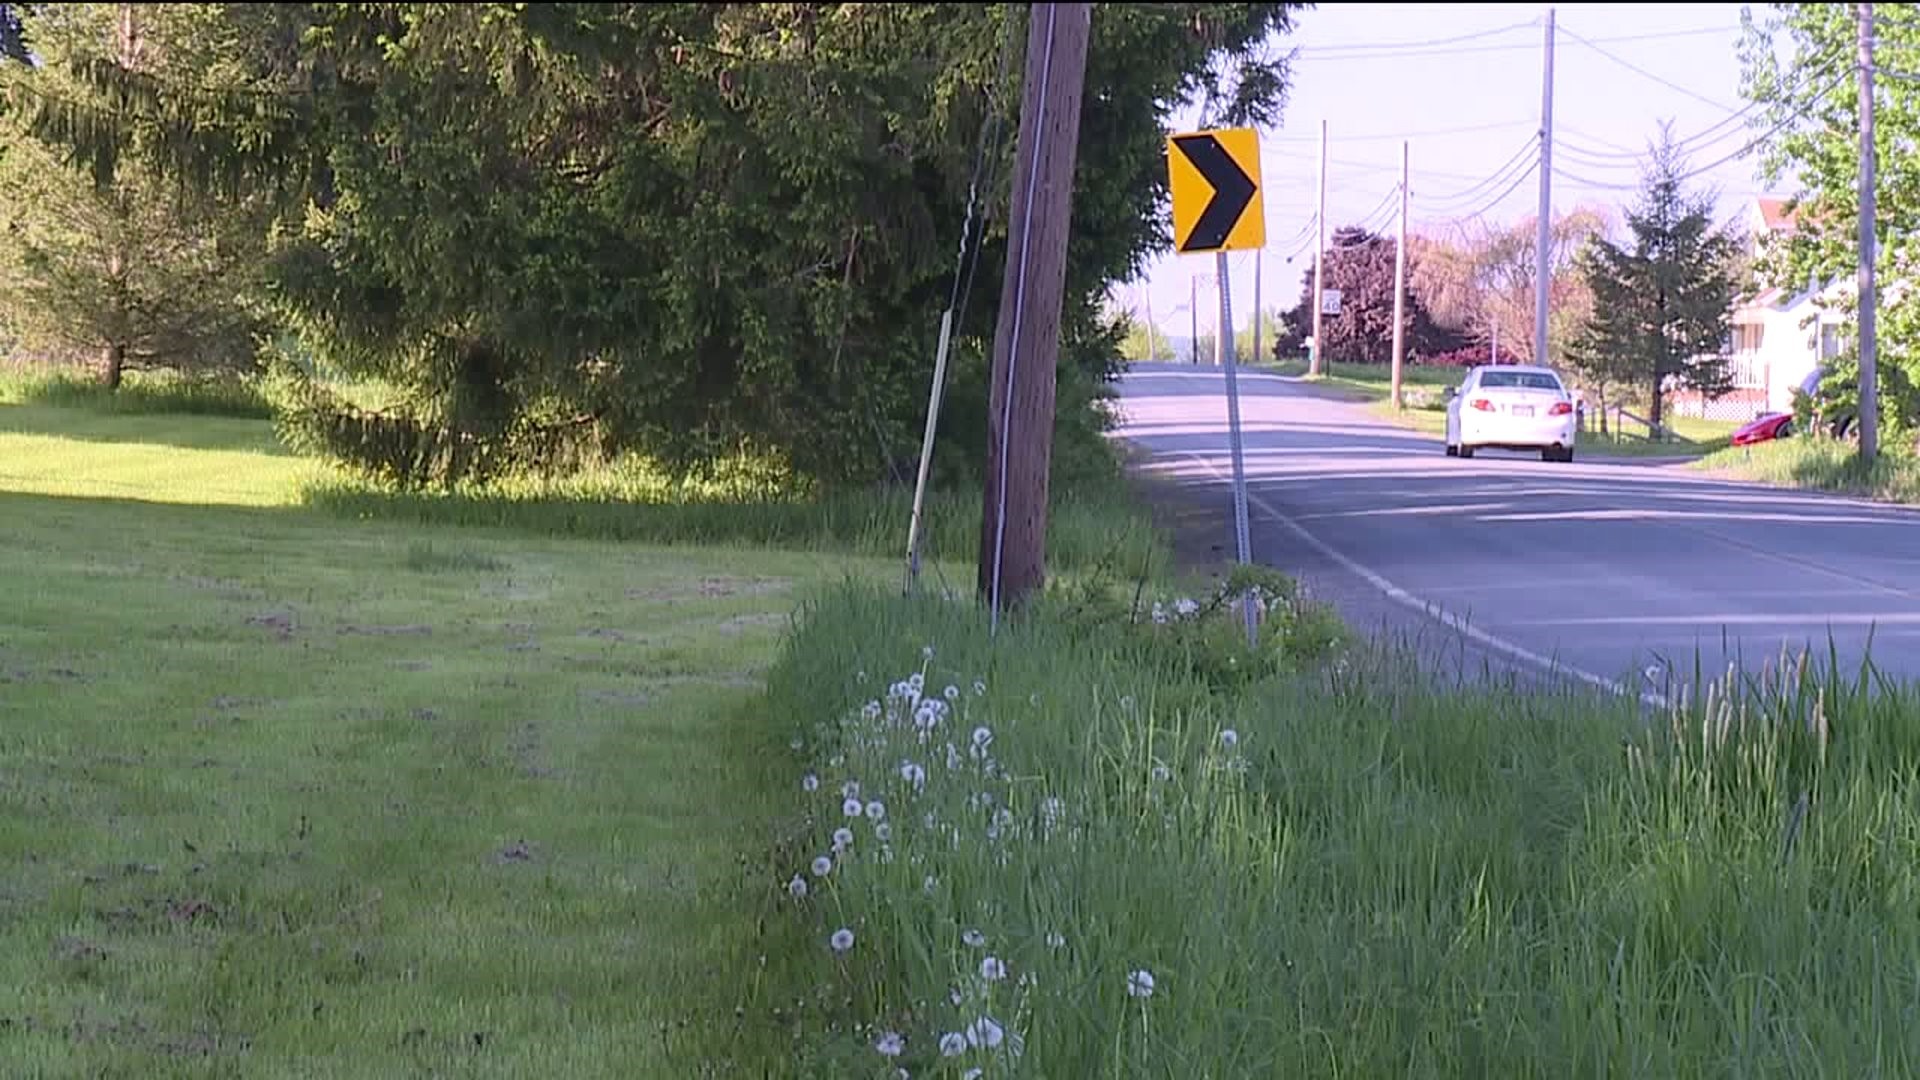 Man Dies After Getting Struck by Vehicle While Riding Lawn Mower